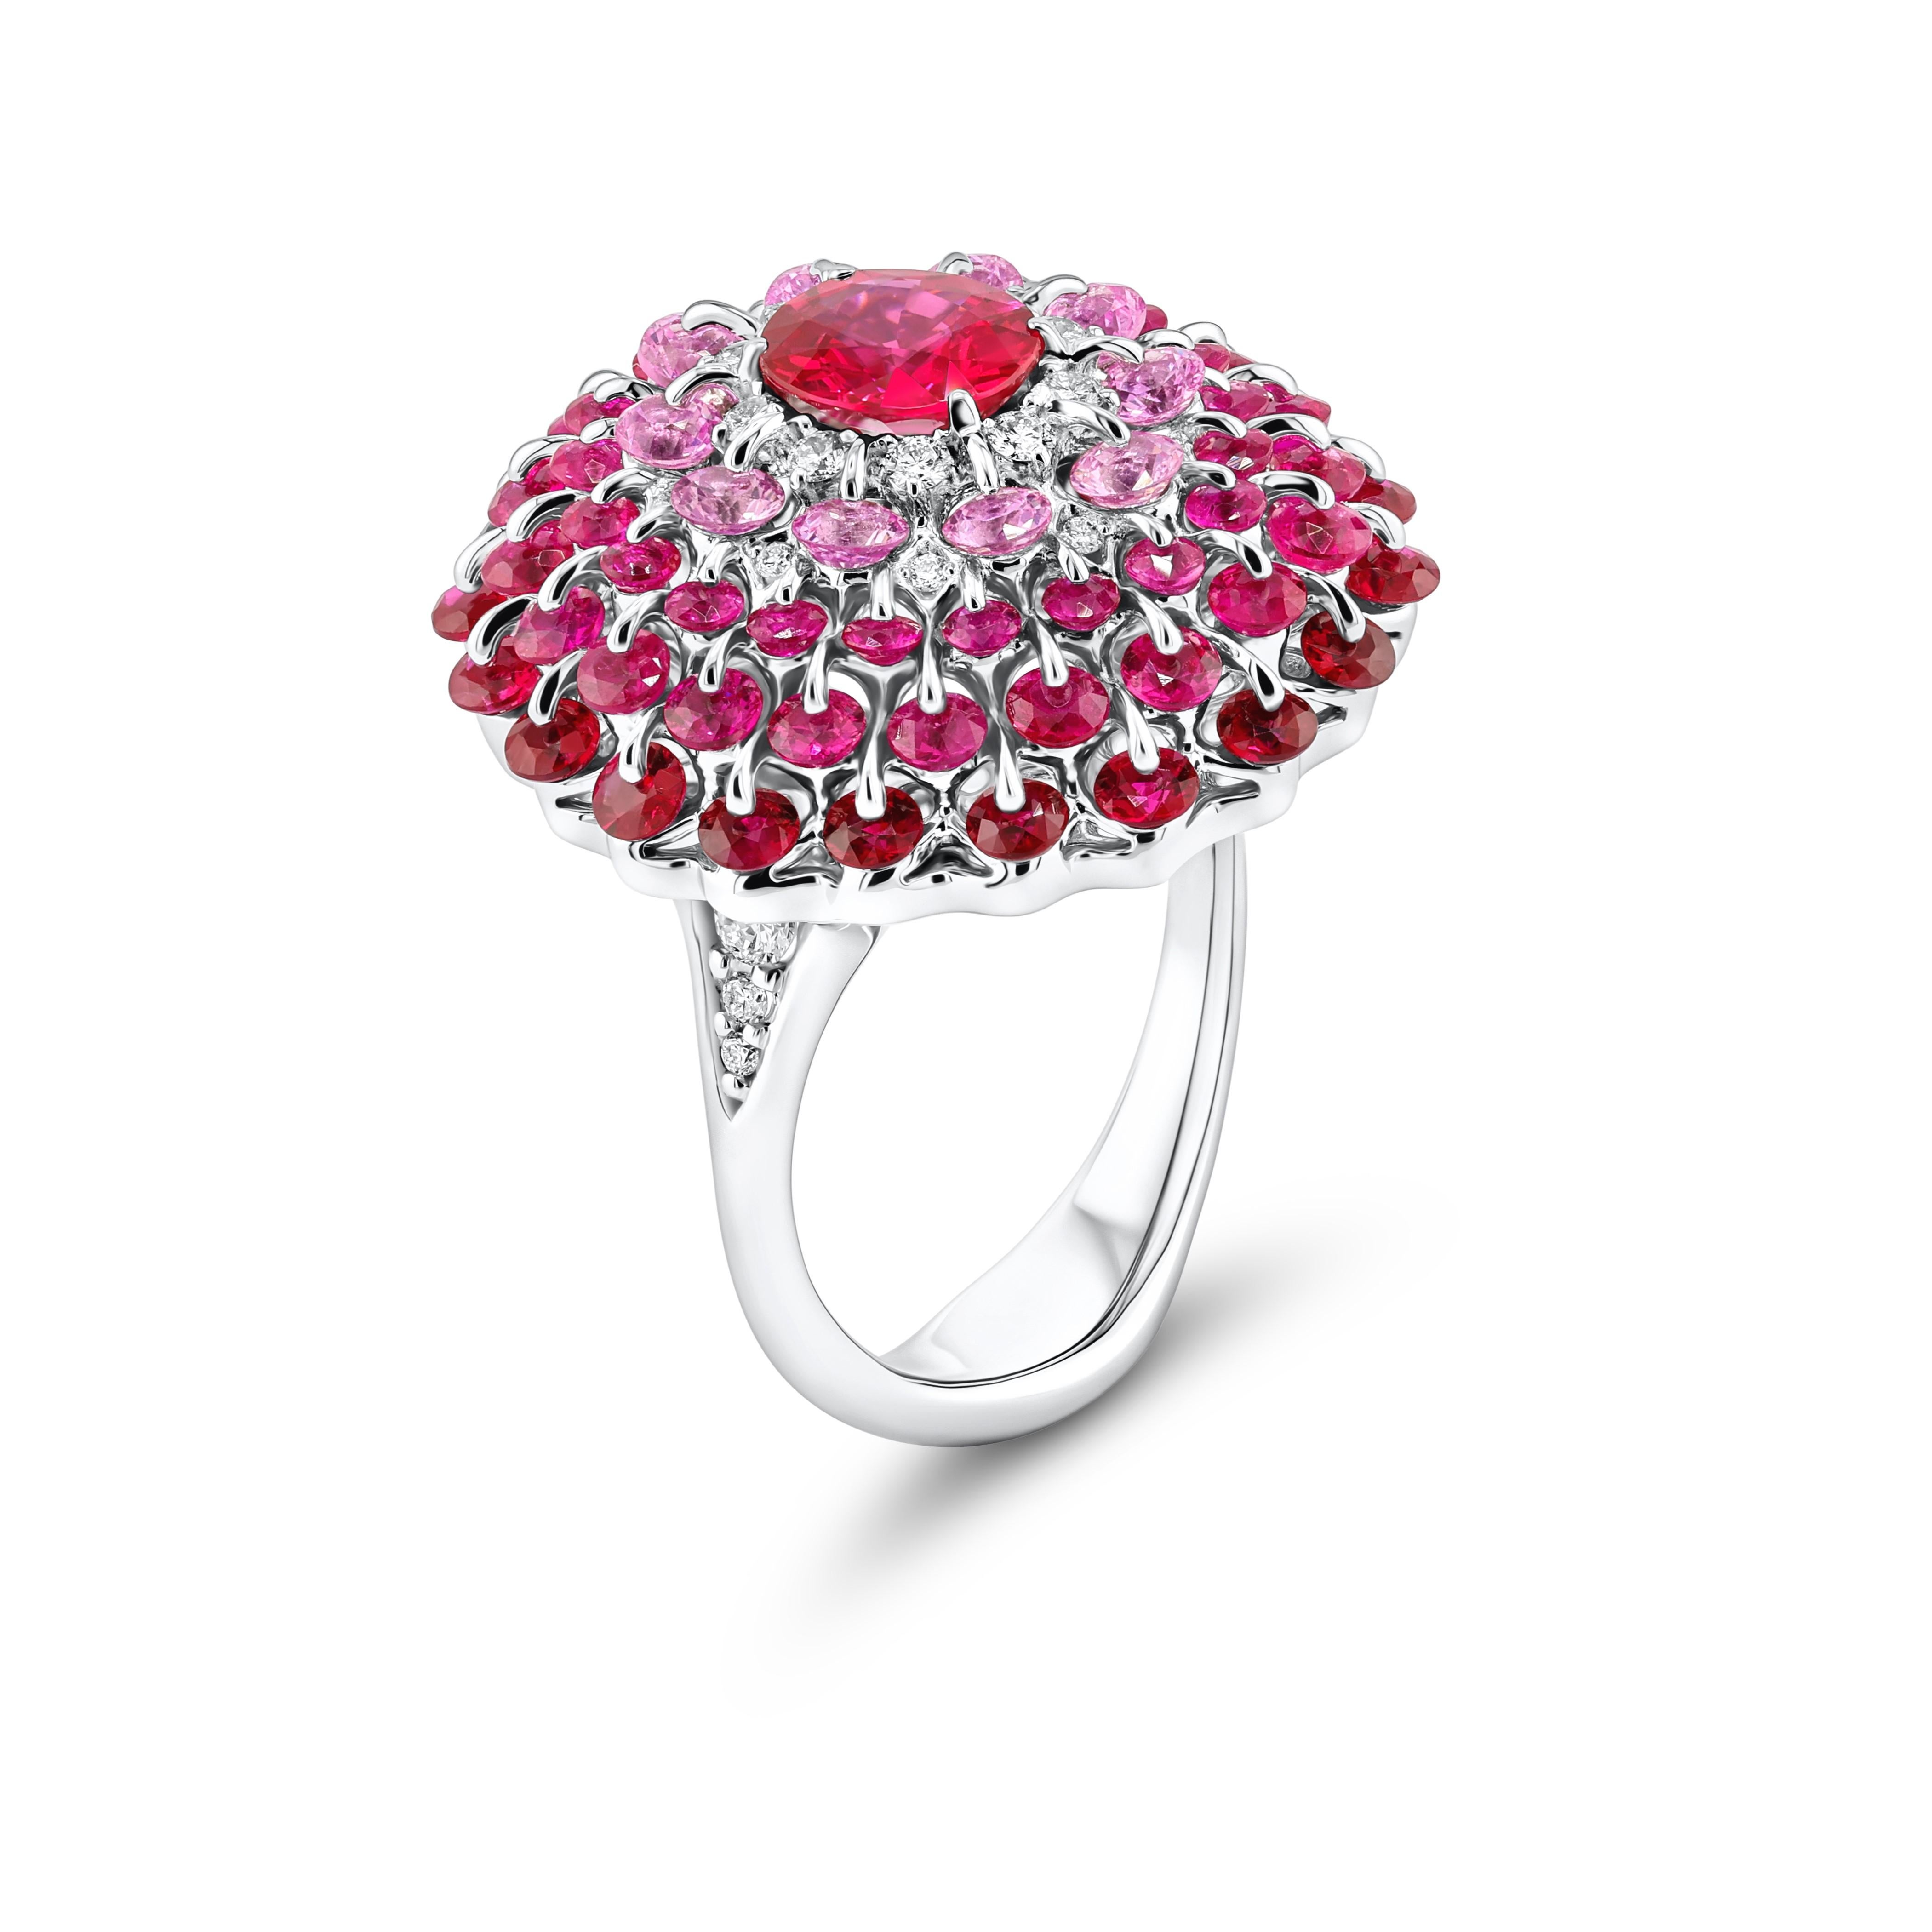 Rubies, pink sapphires and diamonds create a dynamic performance as a graceful ballerina with internationally patented stone technology. Exclusively selected, 1.14ct radiant Mozambique Ruby,  is decorated with the perfect graduation of diamonds,